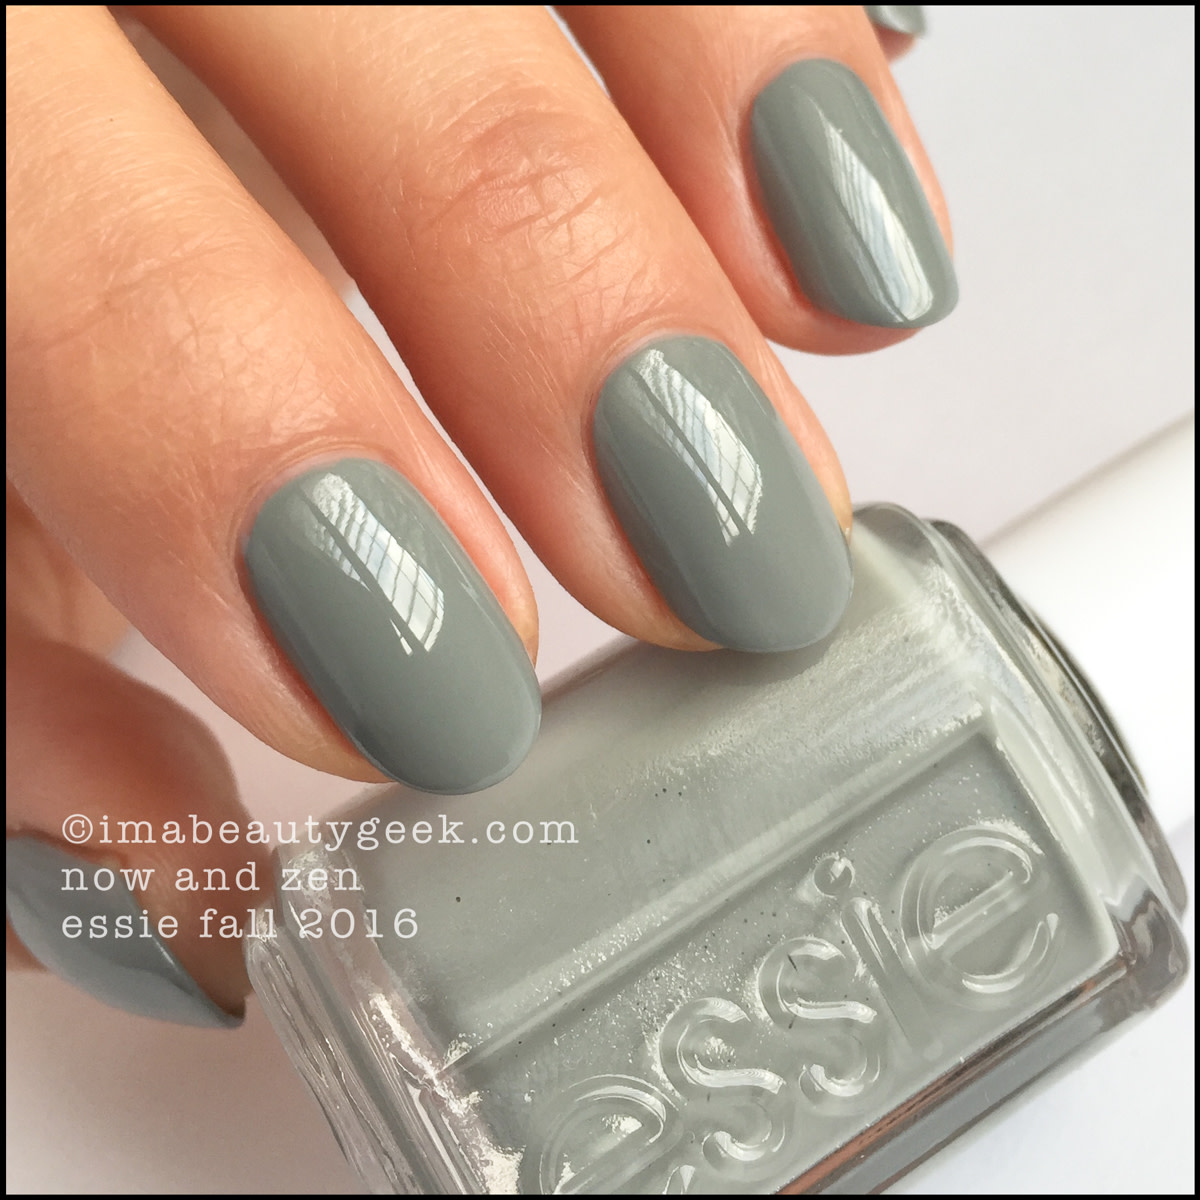 Essie Fall 2016 Swatches Review_Essie Now and Zen Fall 2016